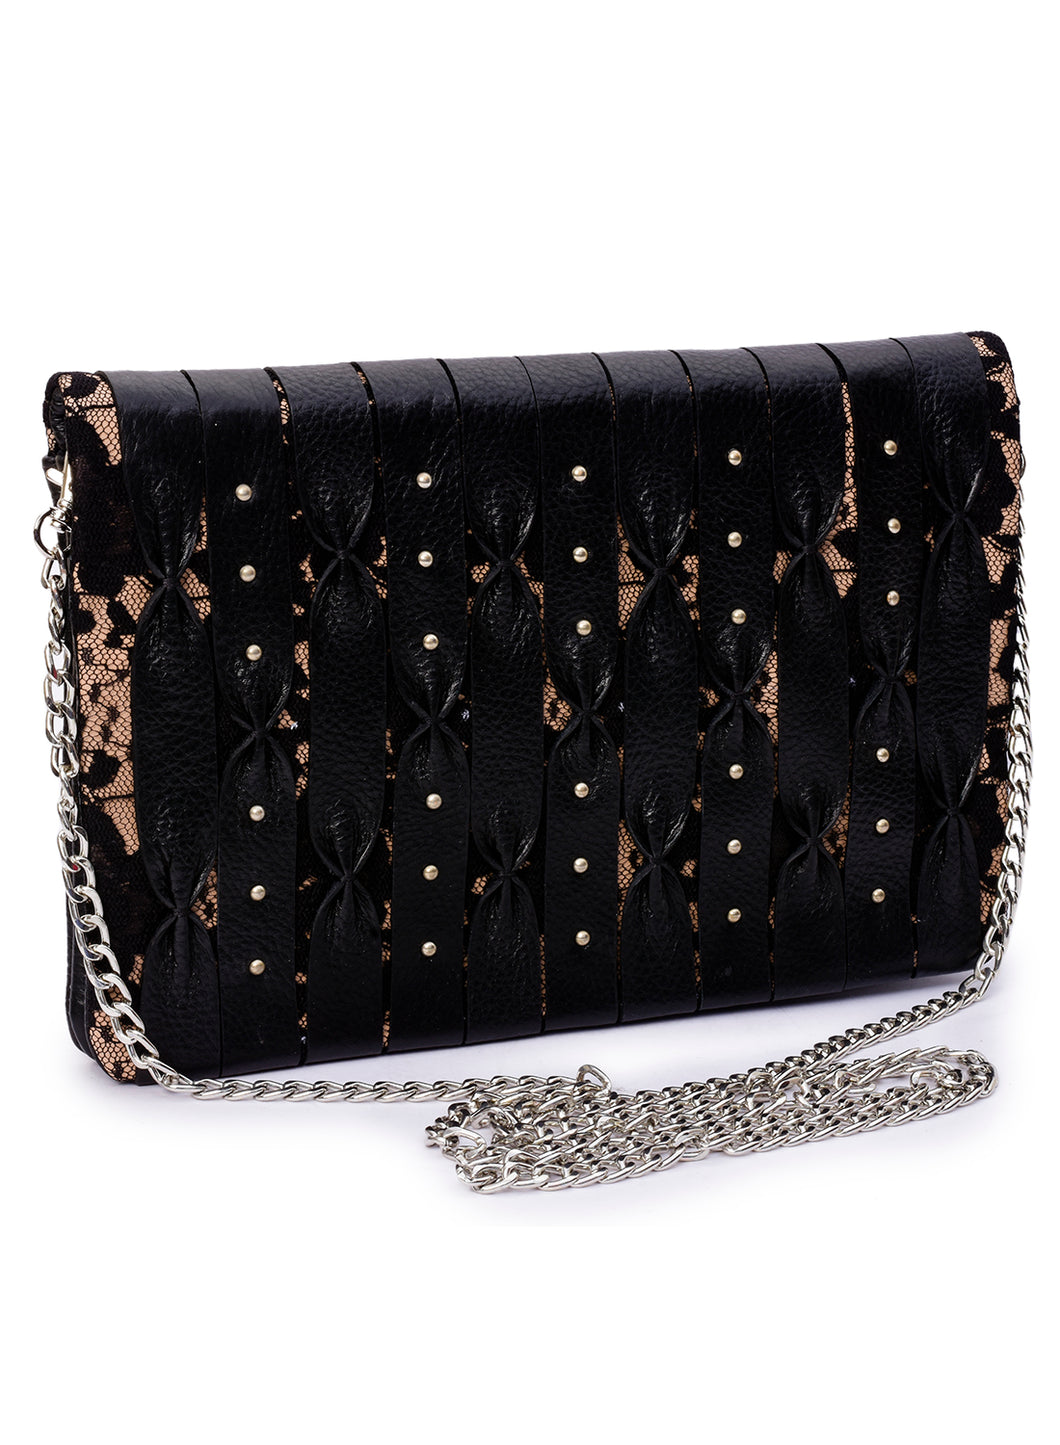 Floral Lace & Leather Combined Fold Over Clutch